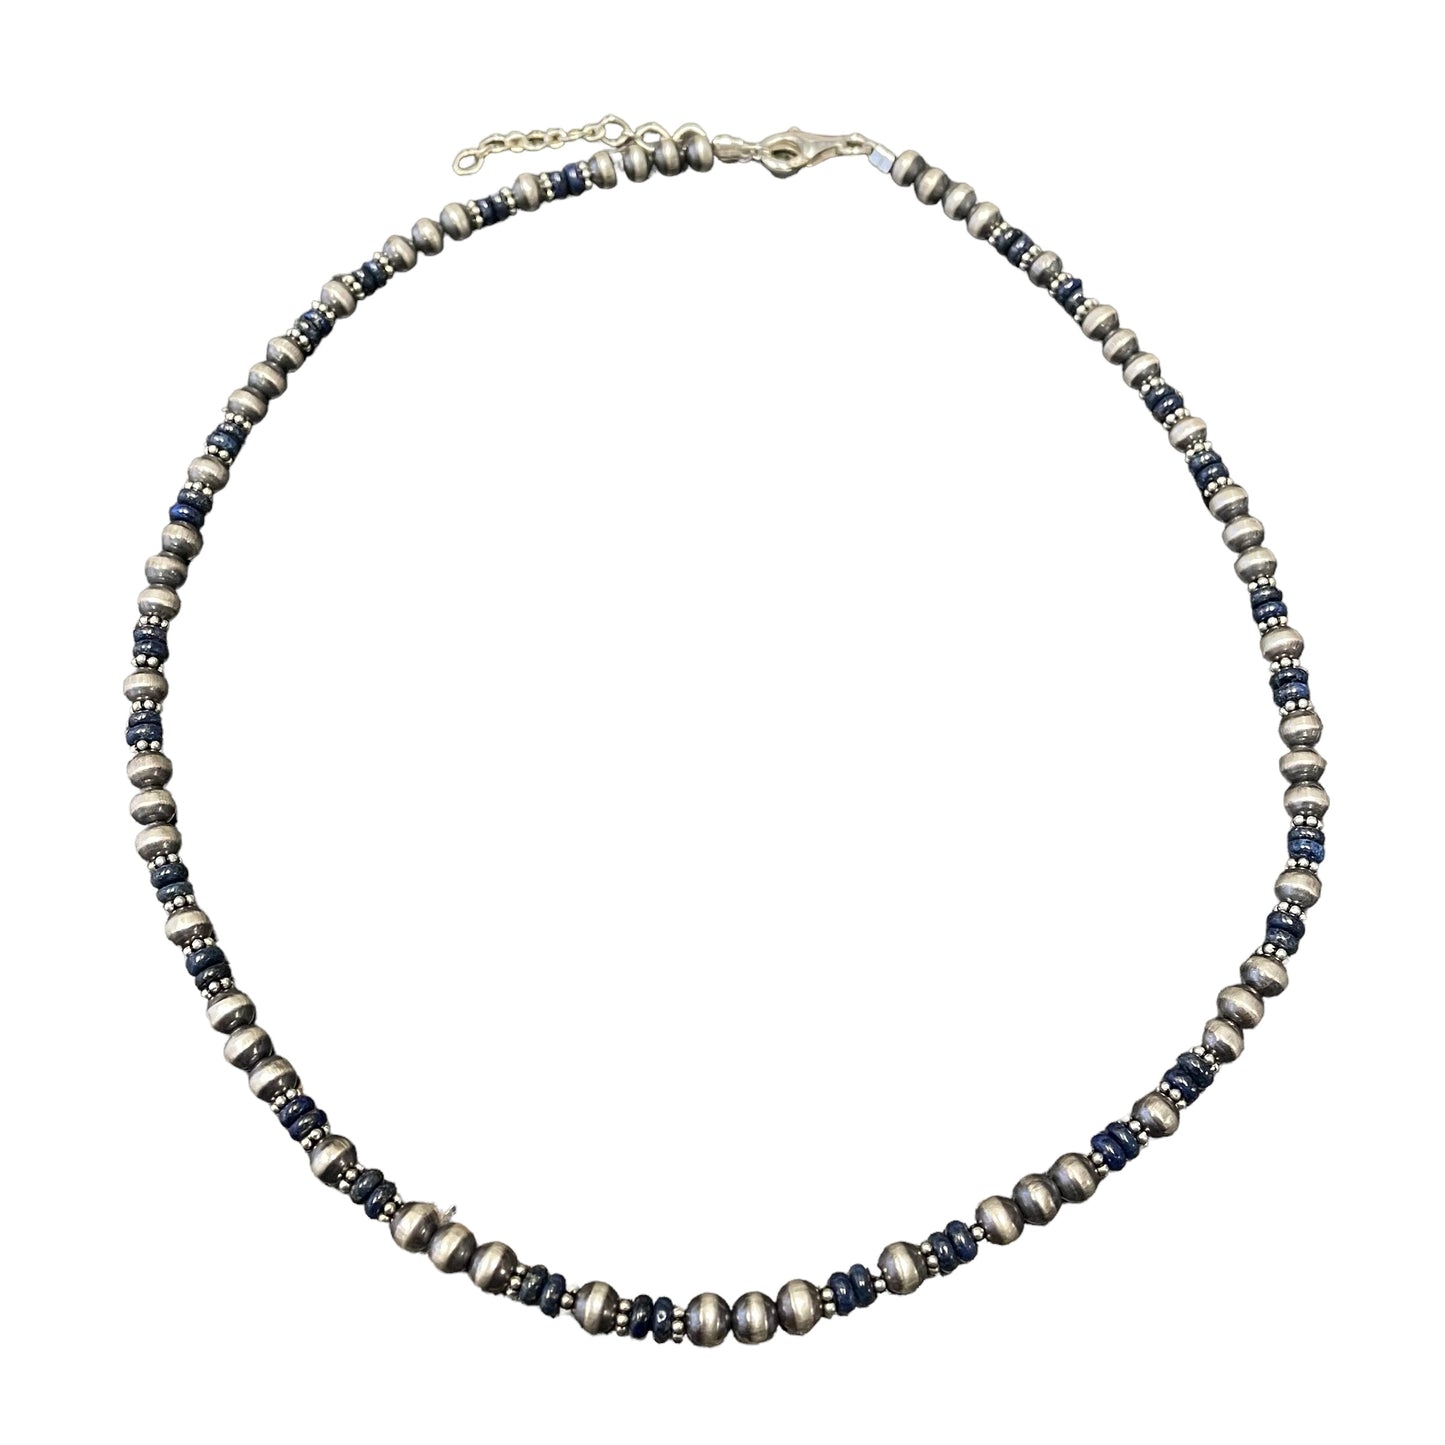 Lapis Desert Pearl Bead Necklace Sterling Silver